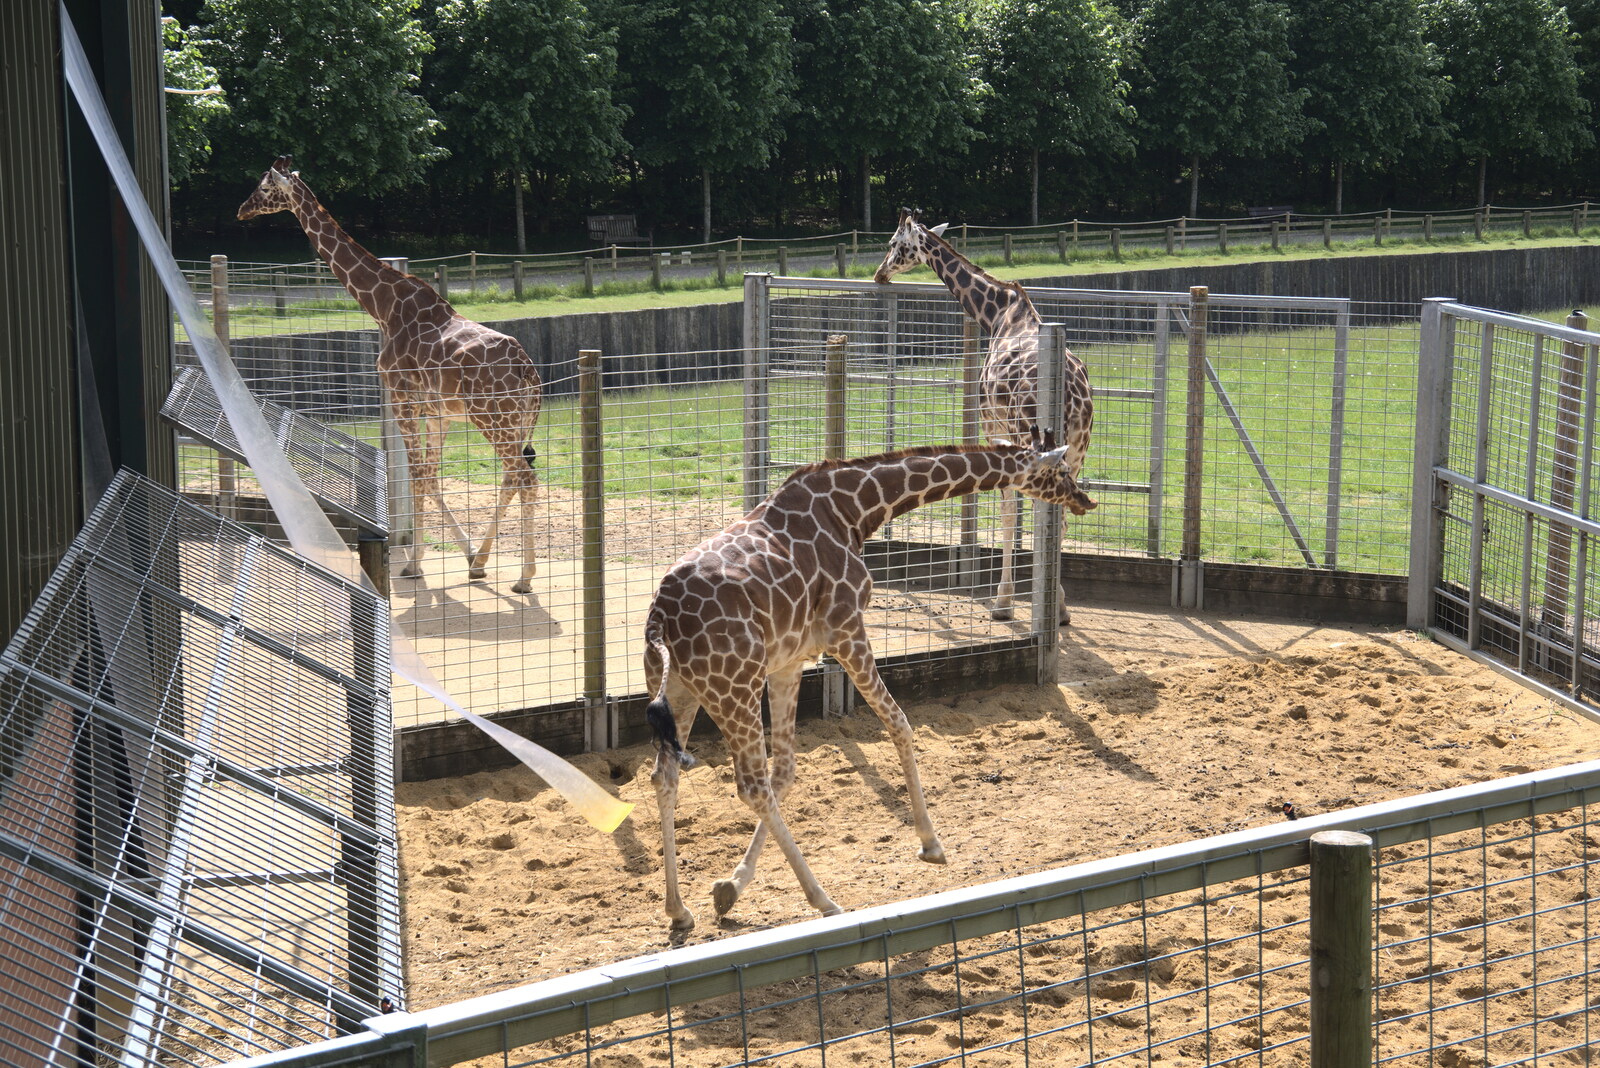 A giraffe legs it out of the enclosure from A Moth Infestation and a Trip to the Zoo, Banham, Norfolk - 21st May 2022